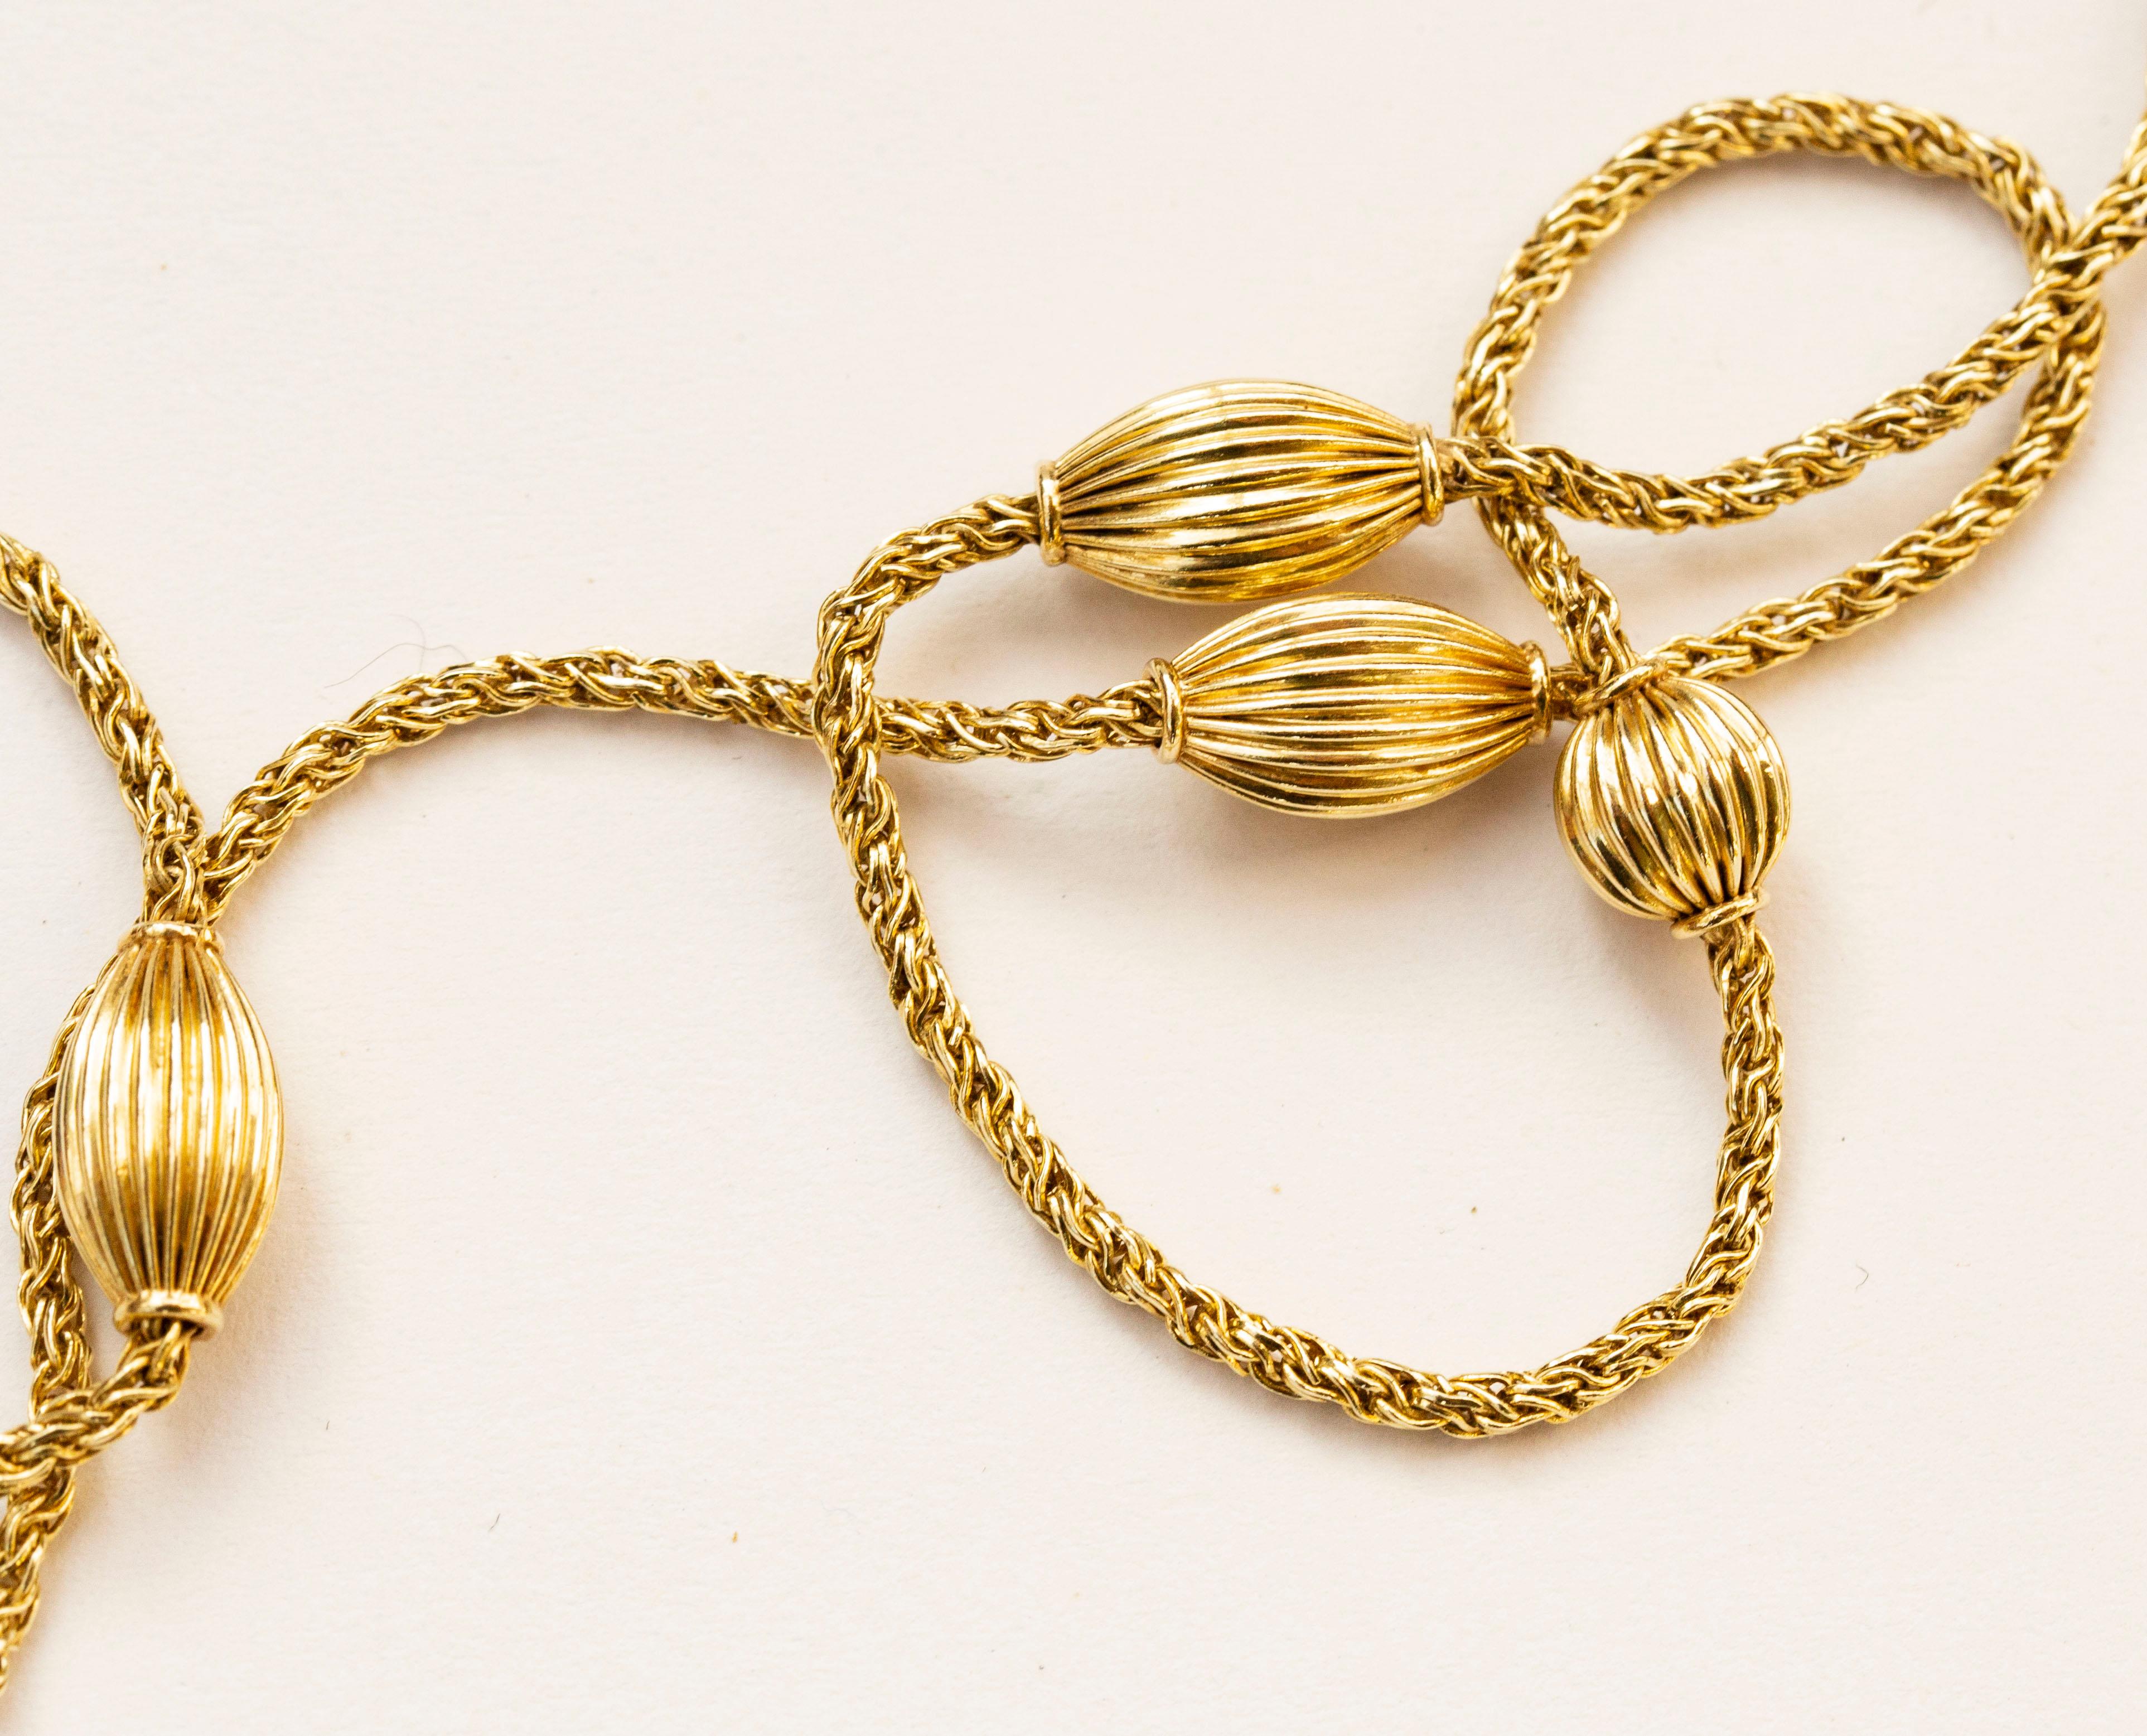 A vintage 14 karat solid yellow gold necklace with ribbed spheres and oval shaped balls. The necklace features a double rope chain and it closes with a spring ring clasp. The necklace has an elegant appearance and it would be a great addition to any